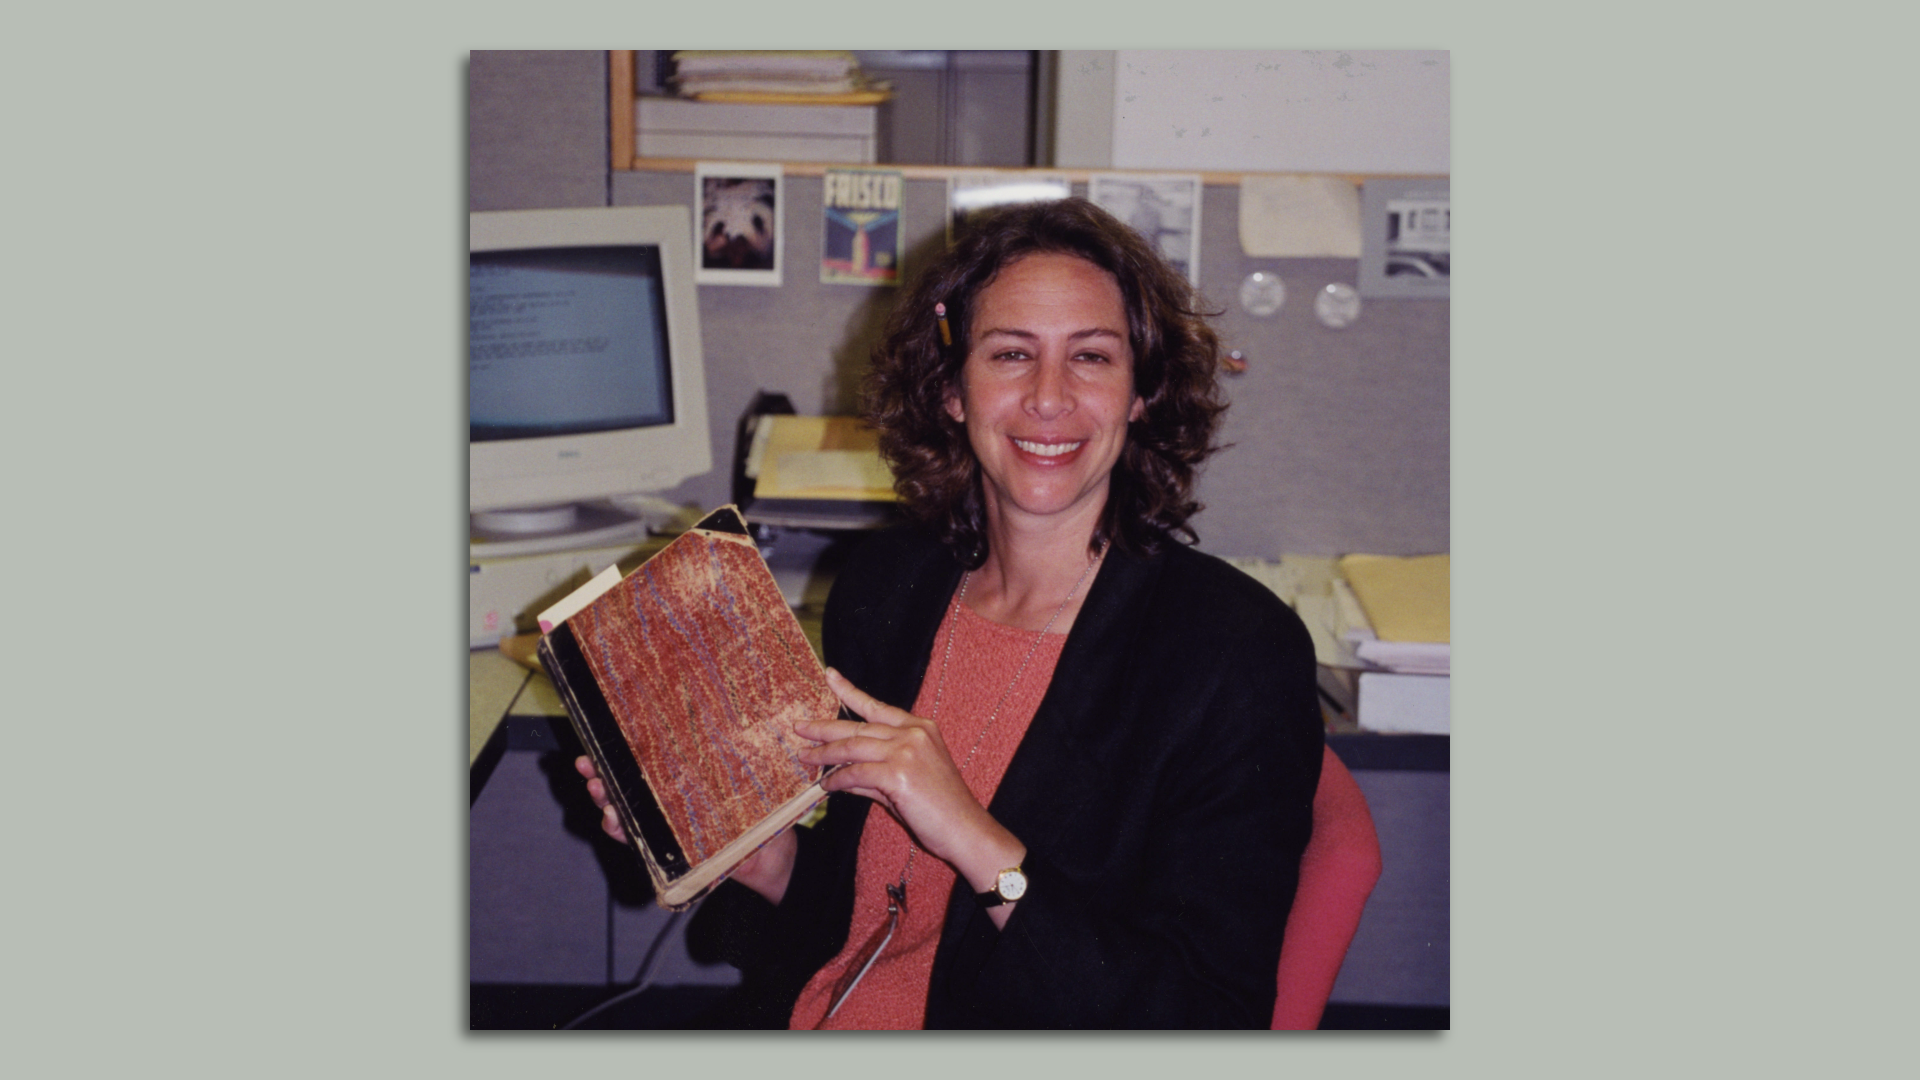 Photo of Susan Goldstein holding an archival book while she smiles at the camera